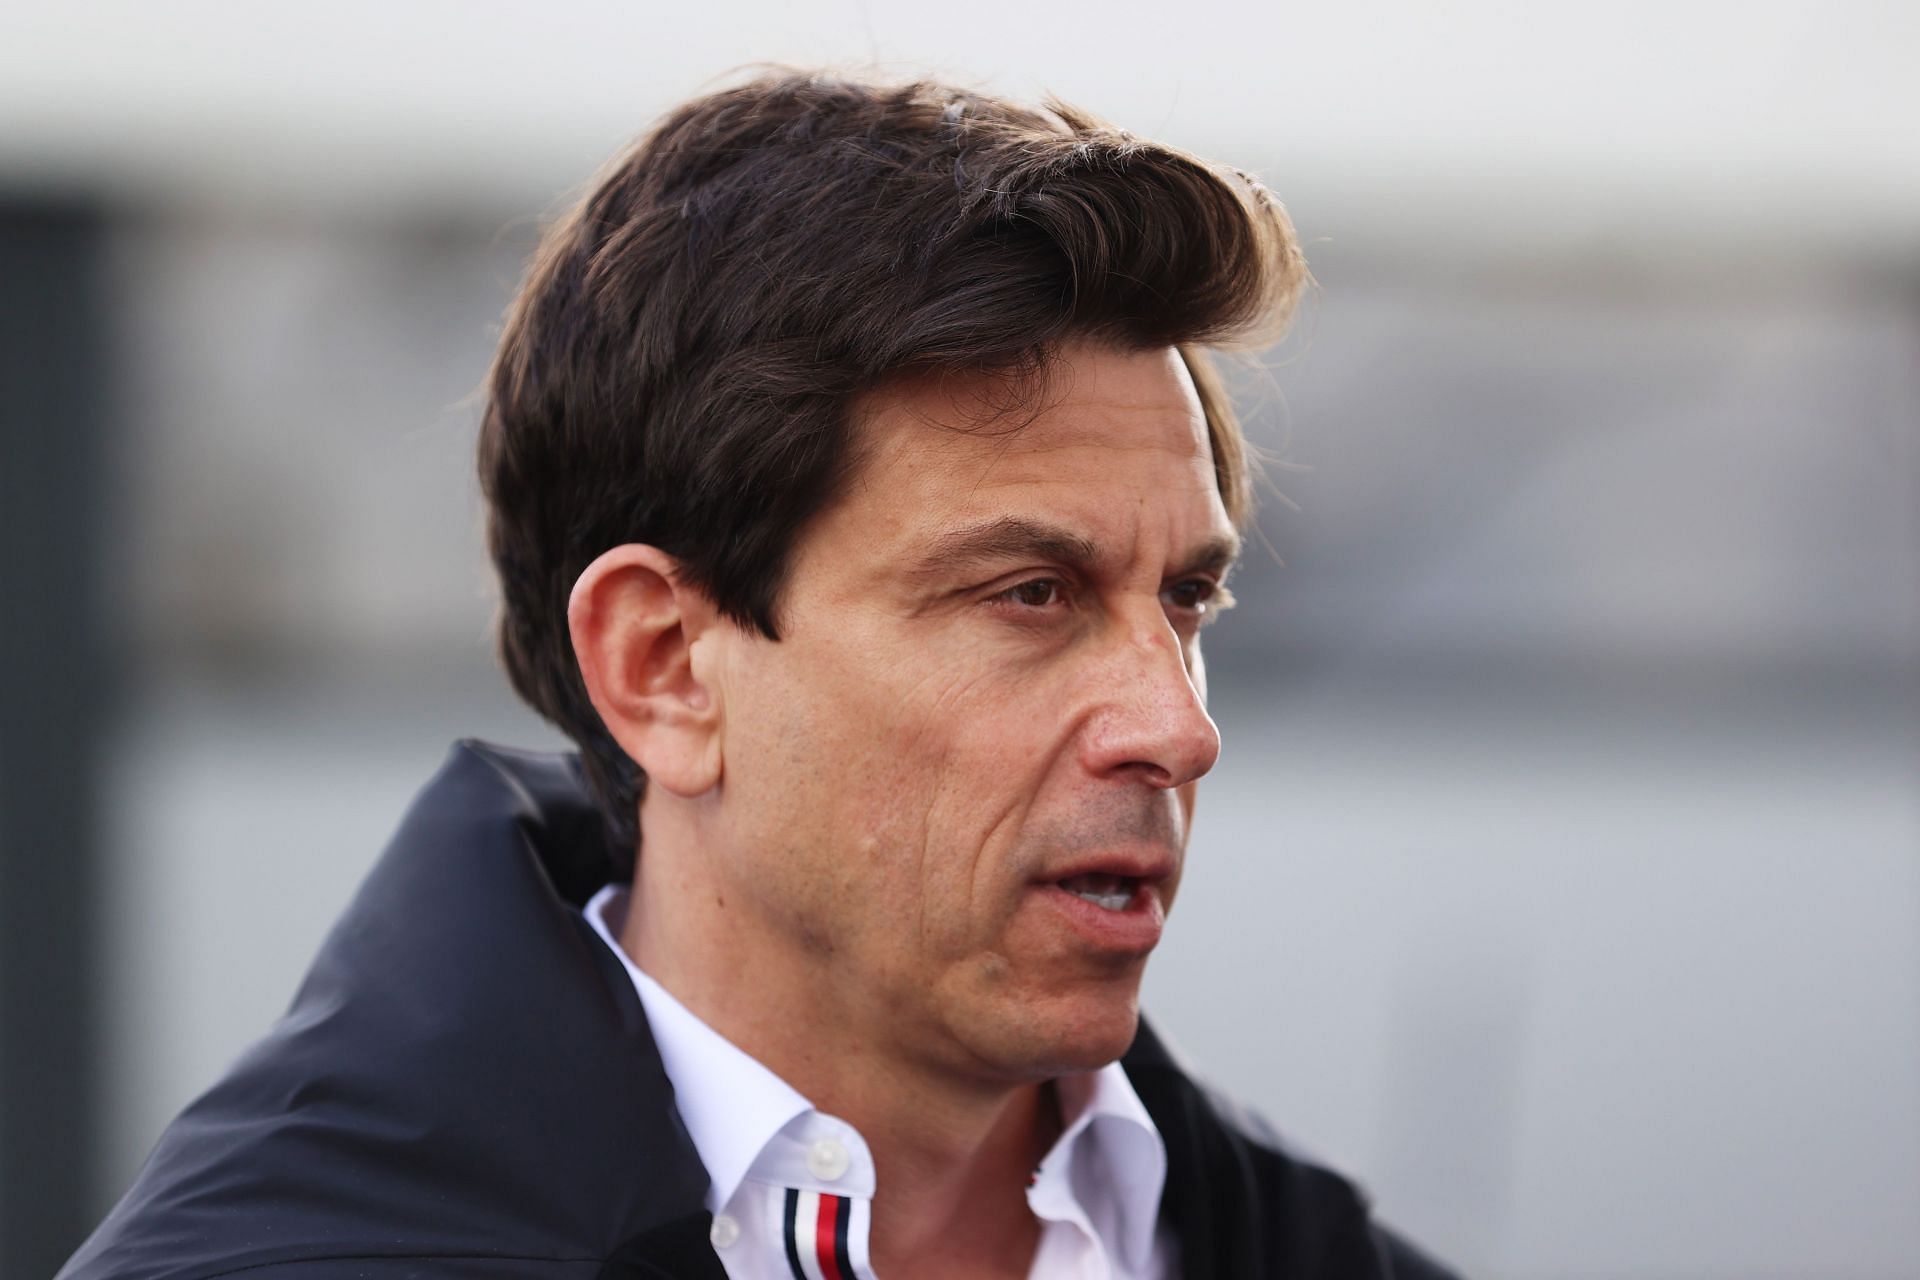 Toto Wolff looks on in the Paddock before final practice ahead of the F1 Grand Prix of Australia at Melbourne Grand Prix Circuit on April 09, 2022, in Melbourne, Australia (Photo by Robert Cianflone/Getty Images)